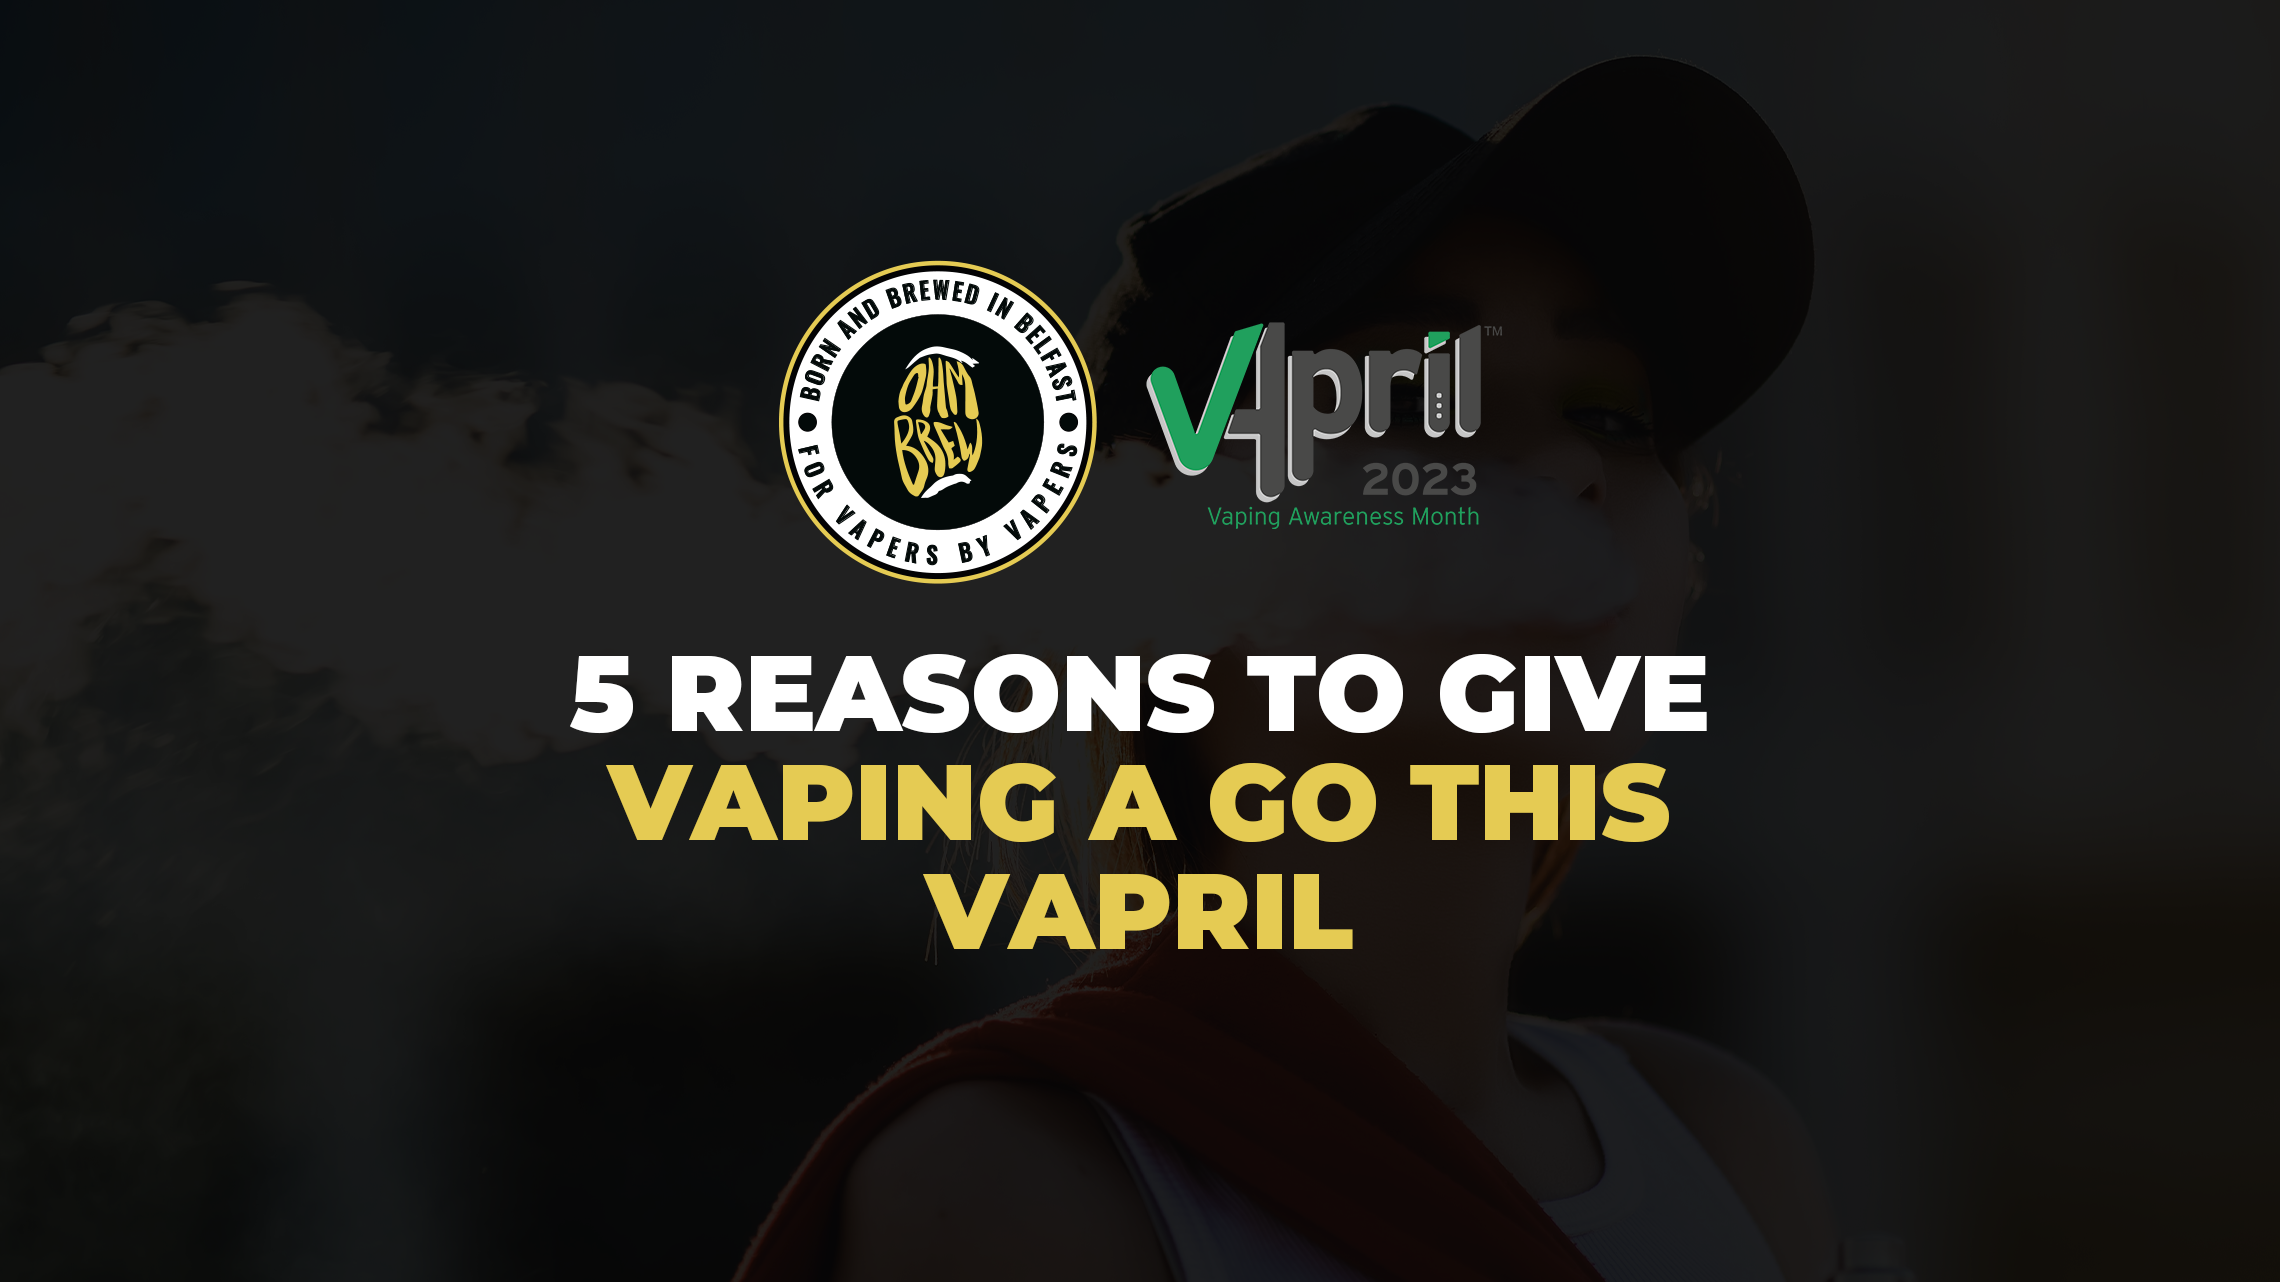 Wondering if you should ditch the cigarettes & switch to a refillable vape? Here are 5 awesome reasons why you should give vaping a go this VApril!